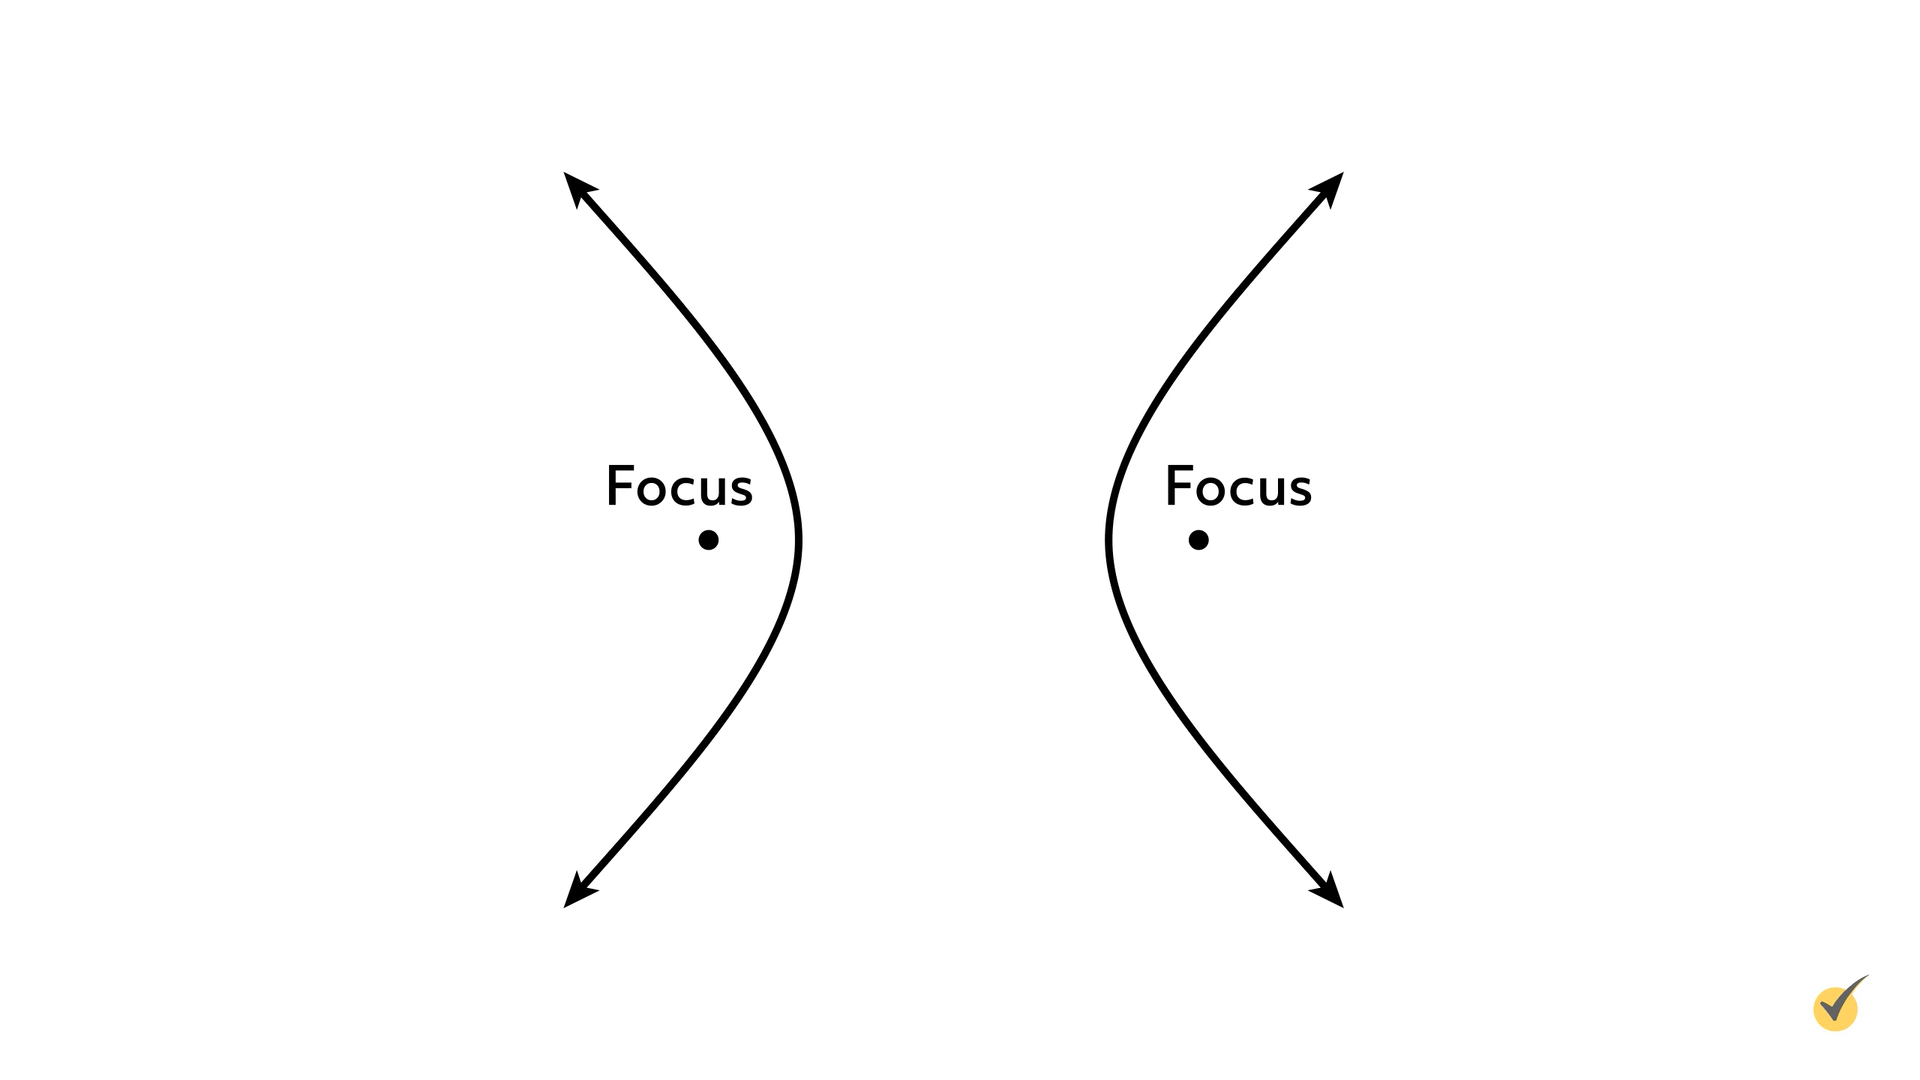 Image of an ellipse with 2 focus points. 2 curved lines drawn to the left and right, with a focus point at the middle of the curve. 